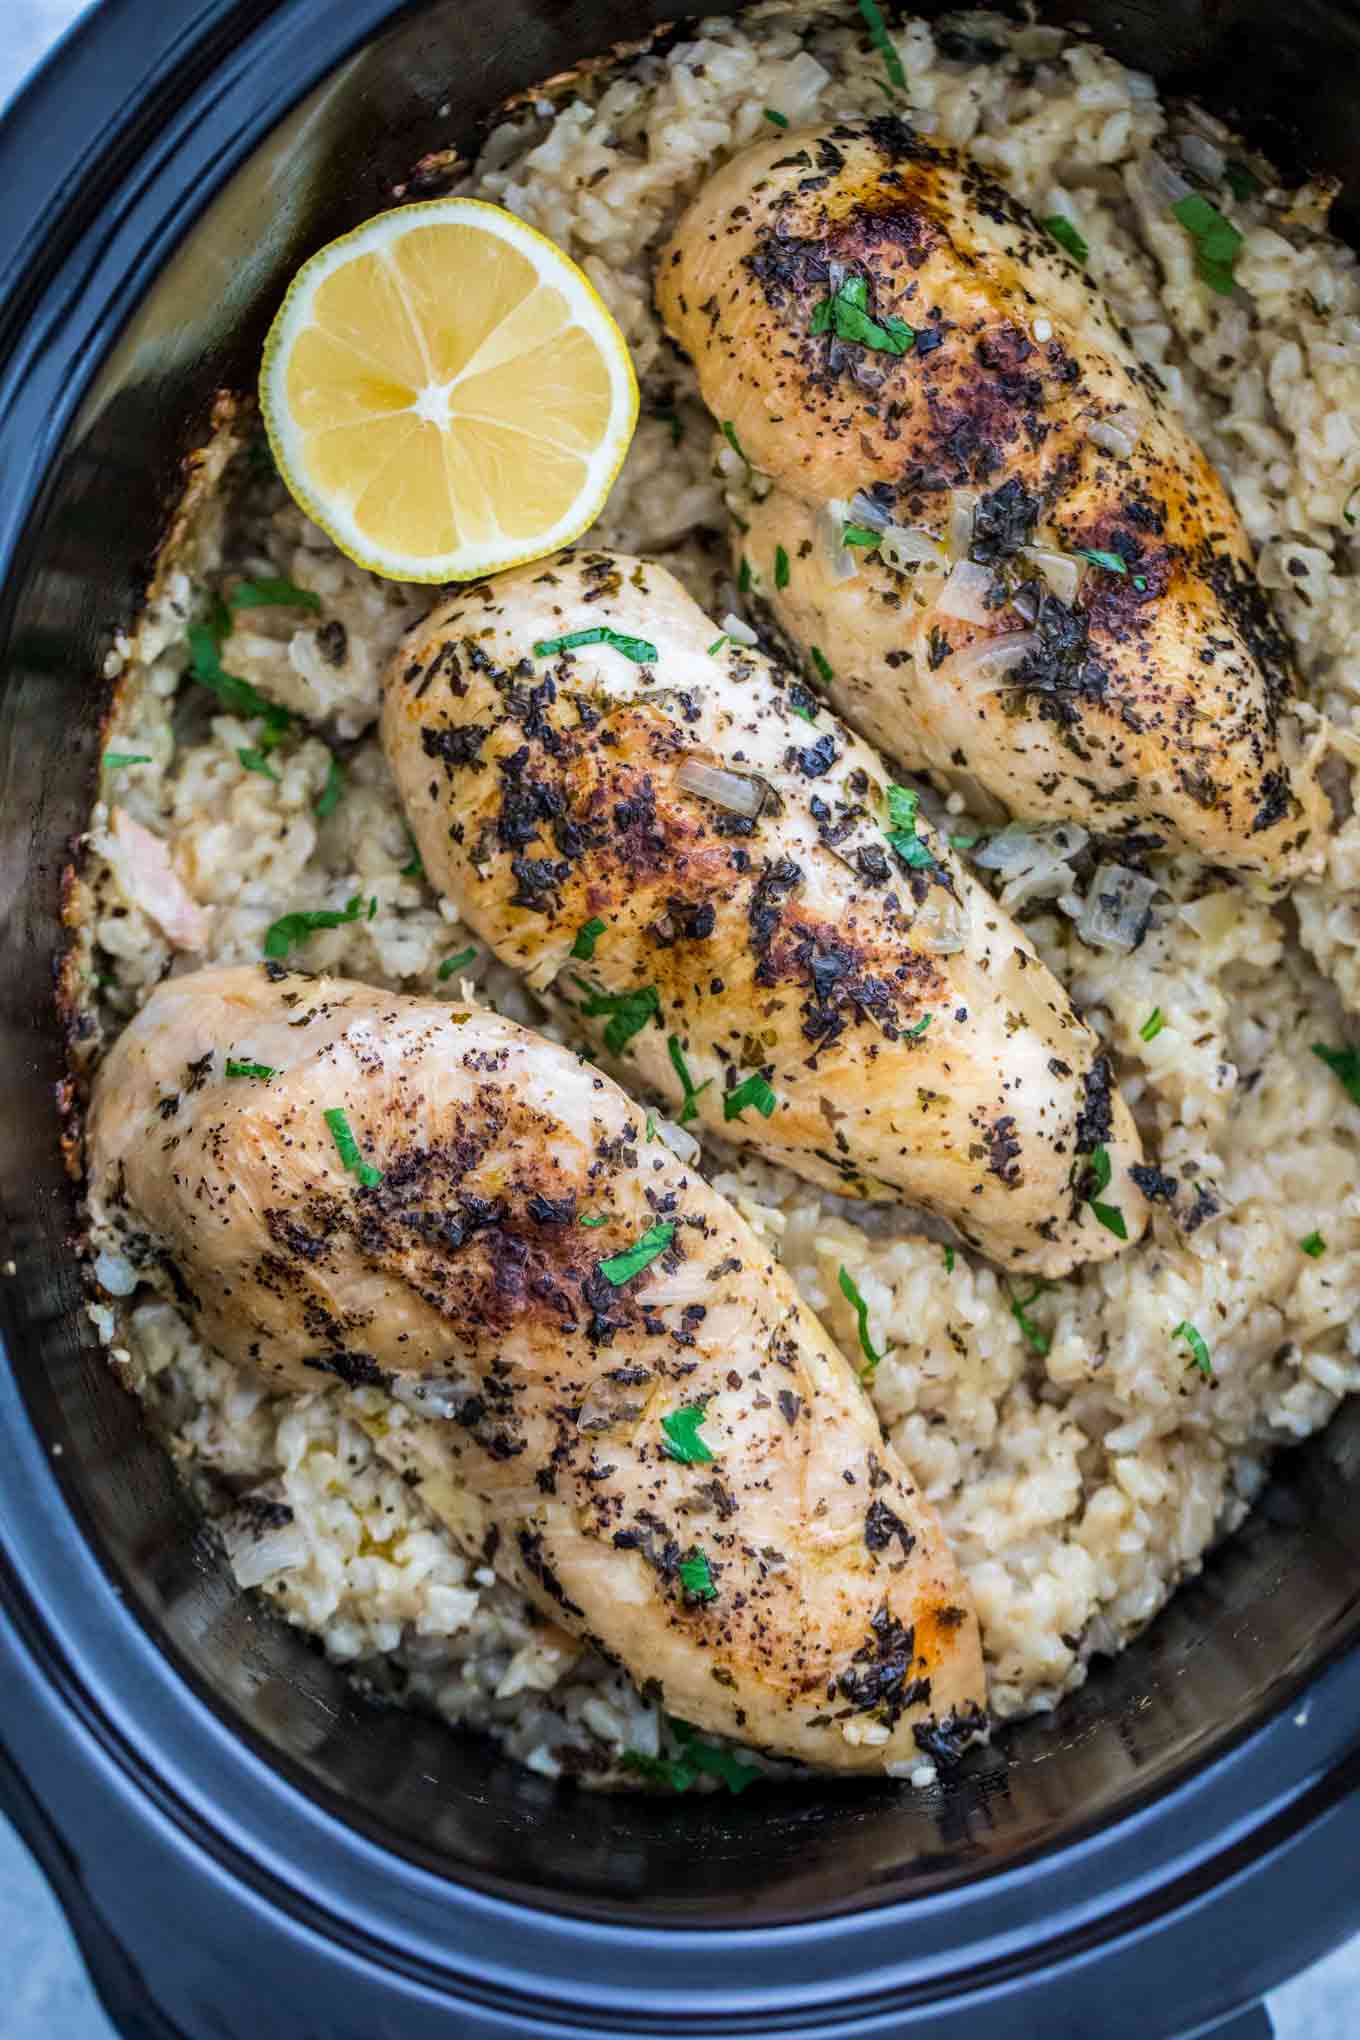 Is it safe to cook chicken in a crock pot Crockpot Chicken And Rice Recipe Video Sweet And Savory Meals